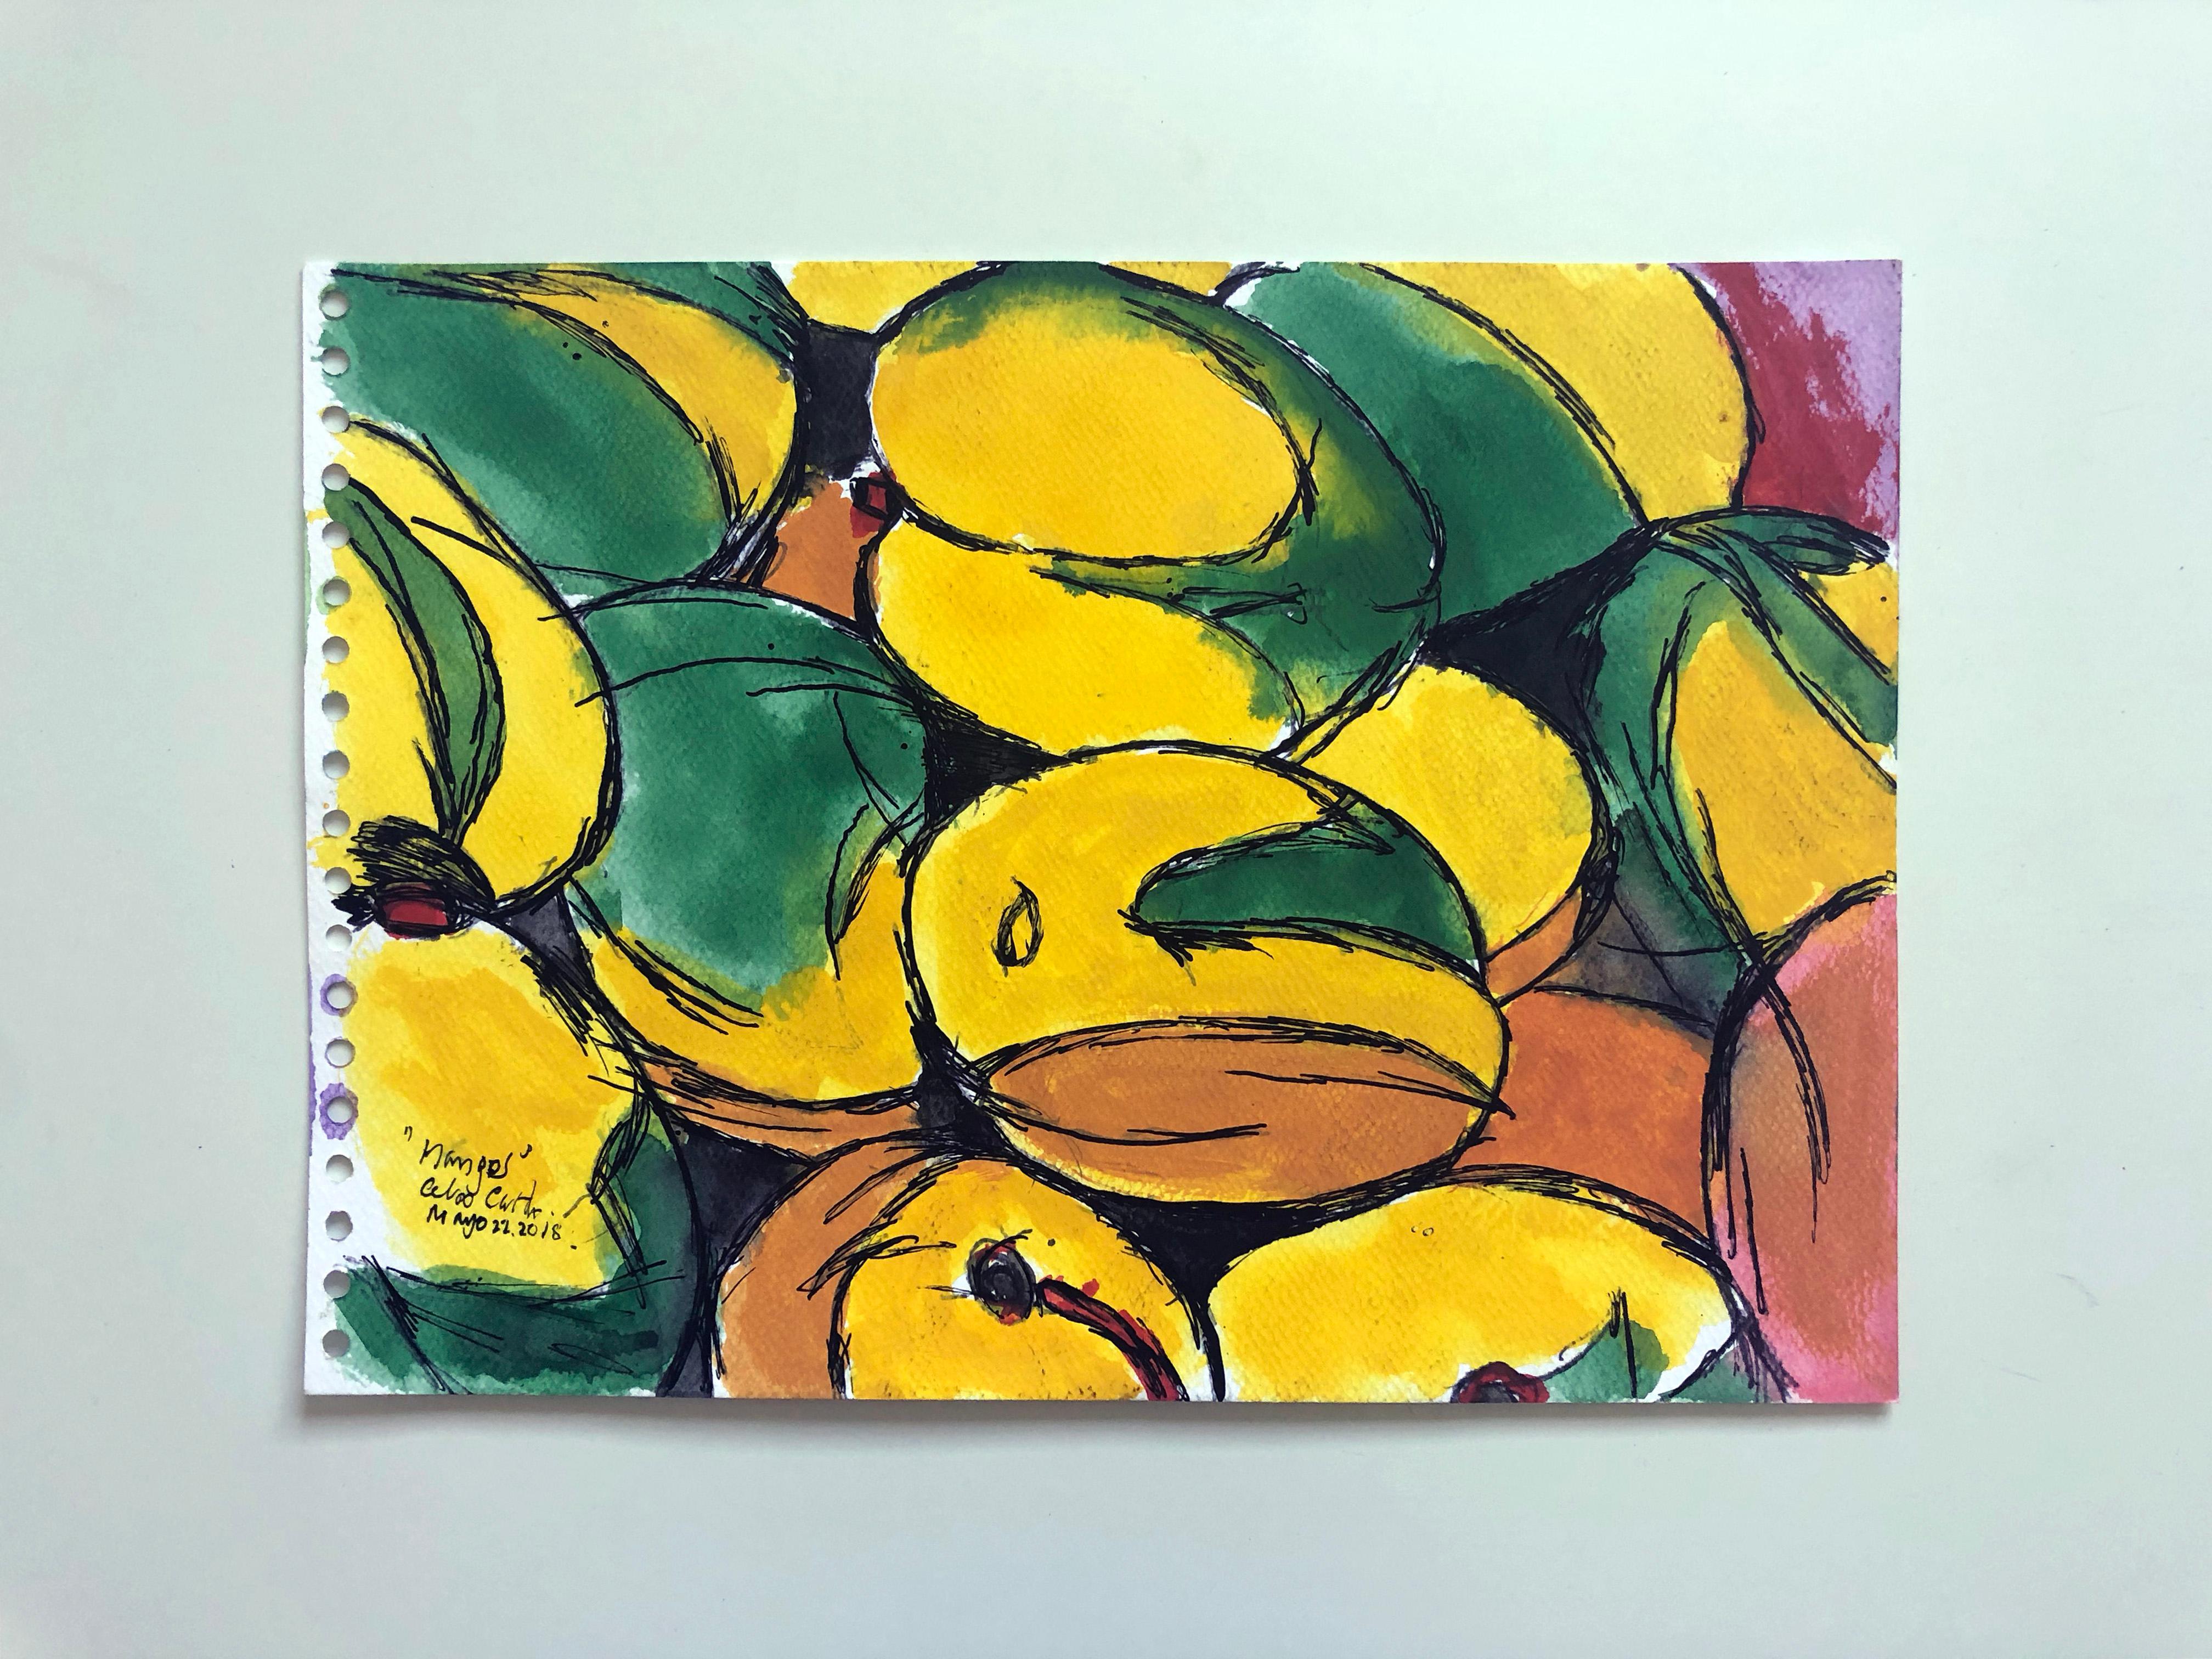 Mangos by Celso Castro
Watercolor and ink on archival paper
Individual size: 9.75 in. H x 13.63 in. W
Overall size: 9.75 in. H x 40.88 in. W
One of a kind
2018

Celso Castro-Daza was born in Valledupar, Colombia. He has a BFA from Pratt